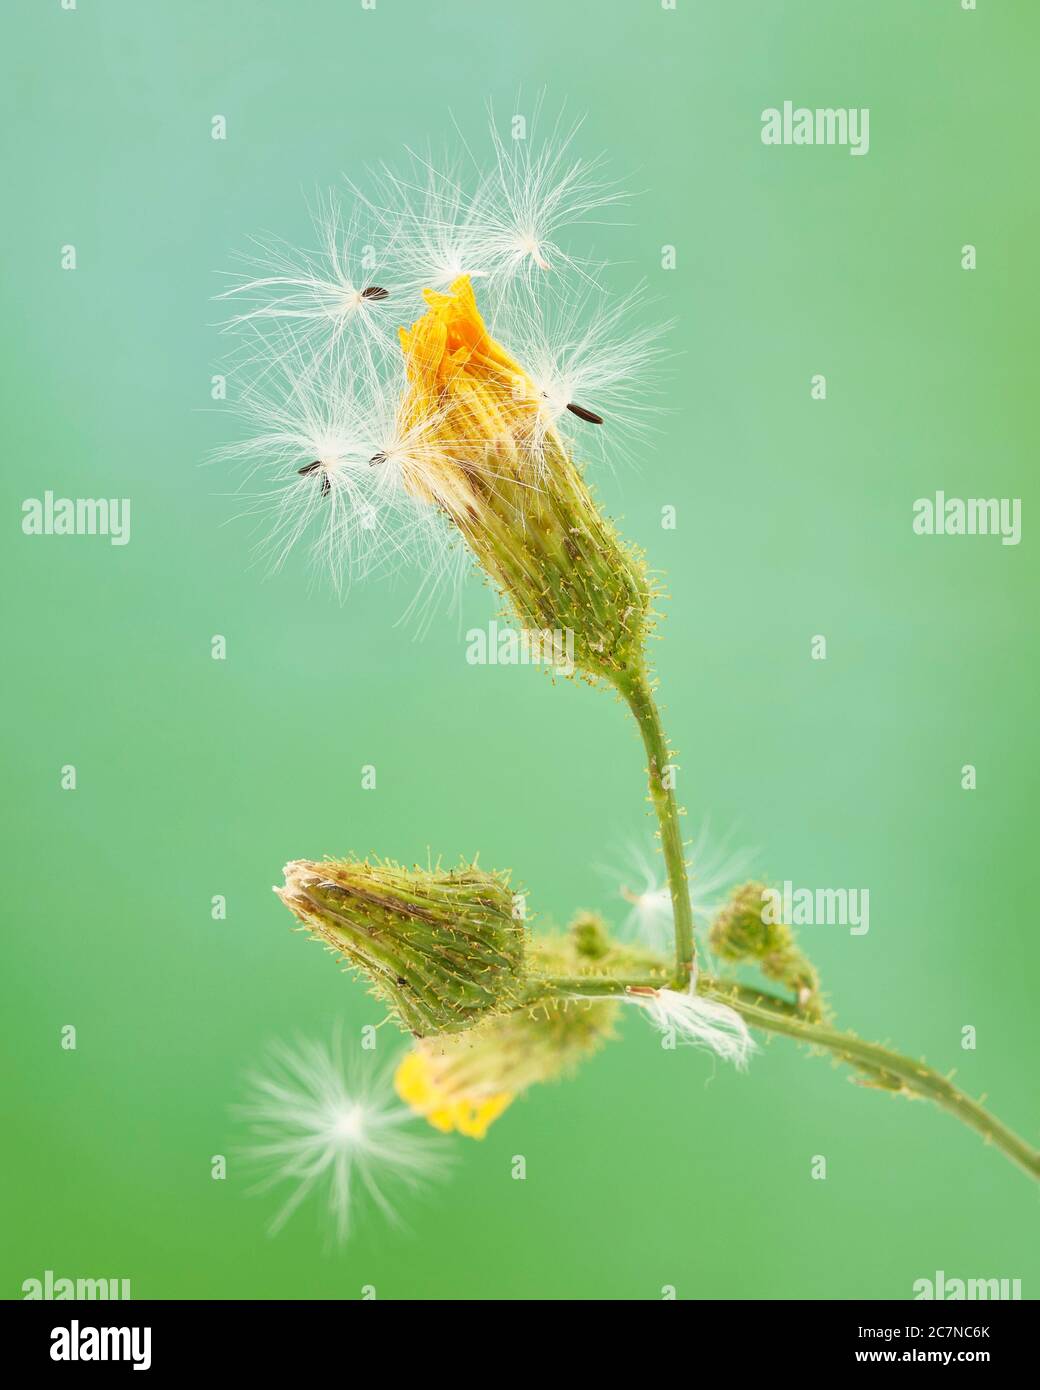 Unopened flower buds of a narrow leaf hawksbeard, Crepis tectorum, are covered with its own seeds that look similar to those of the common dandelion a Stock Photo